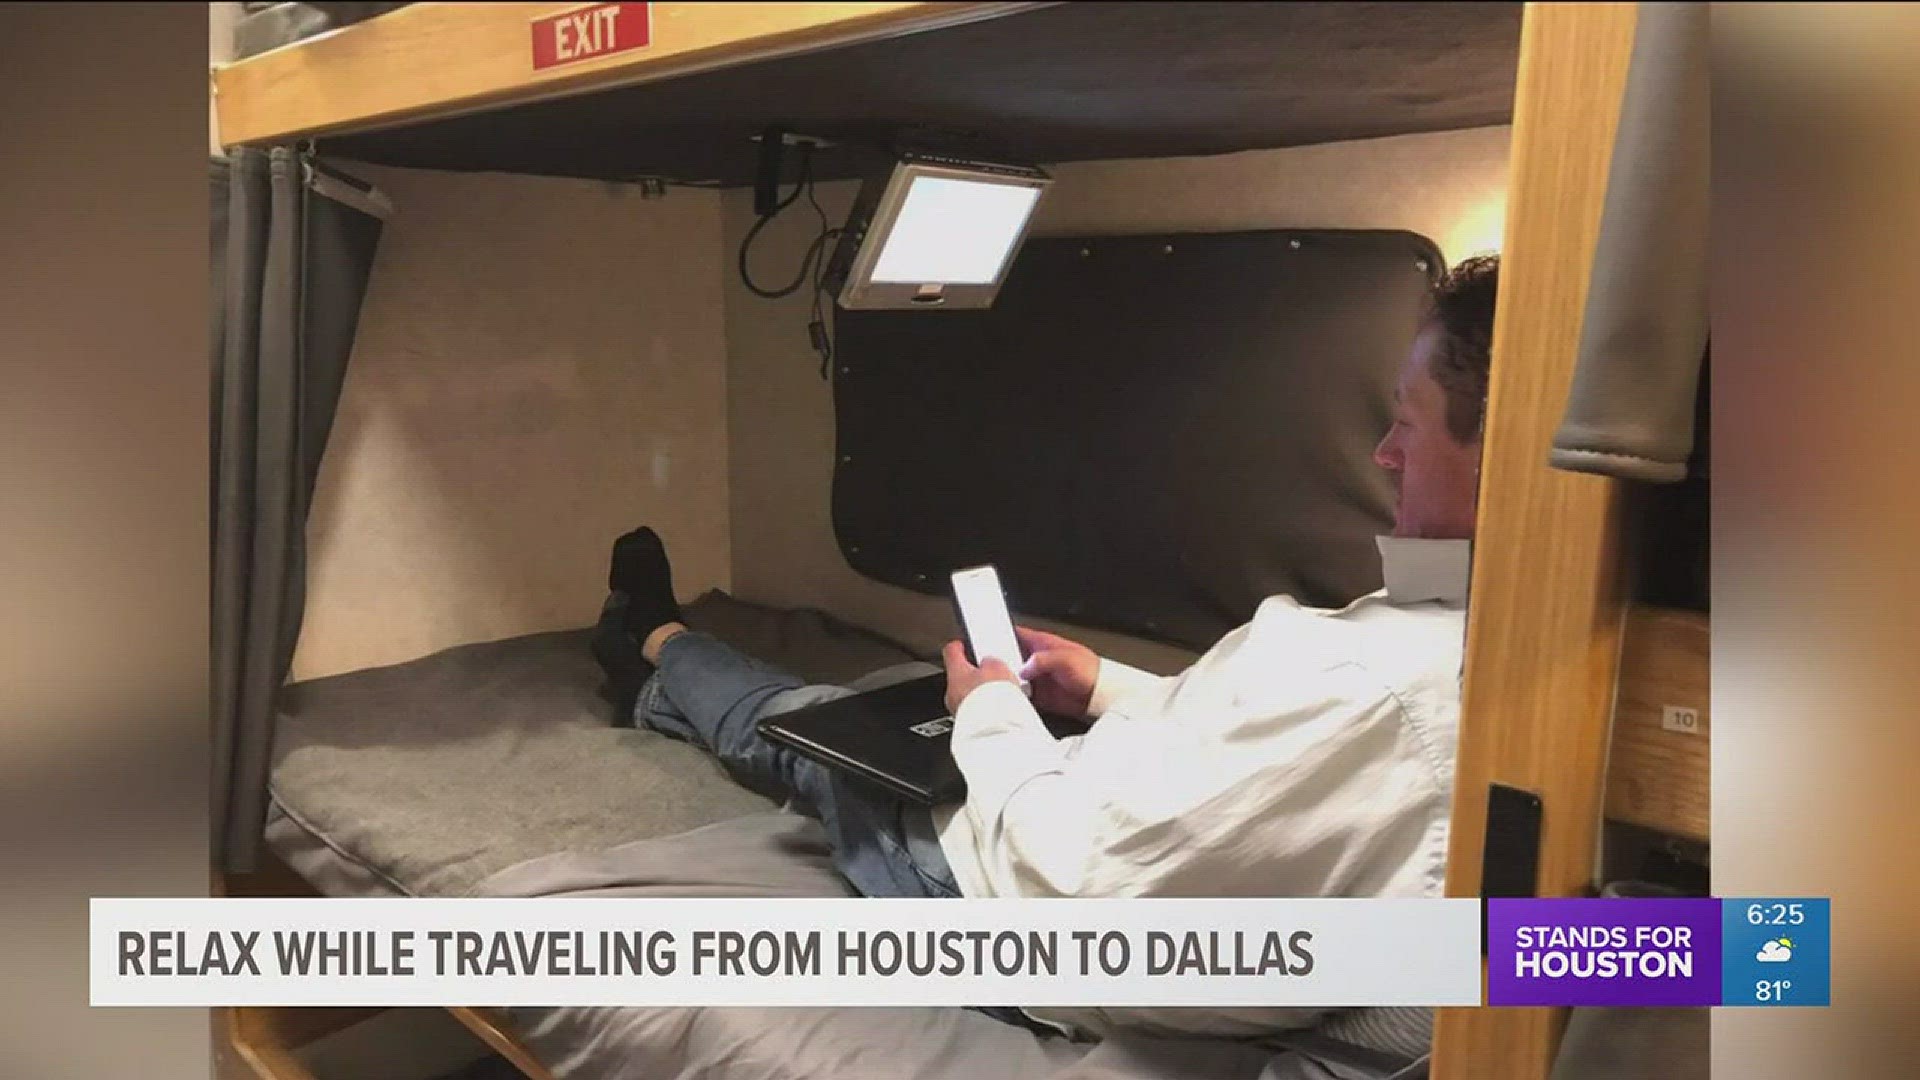 You can relax while traveling from Houston to Dallas.